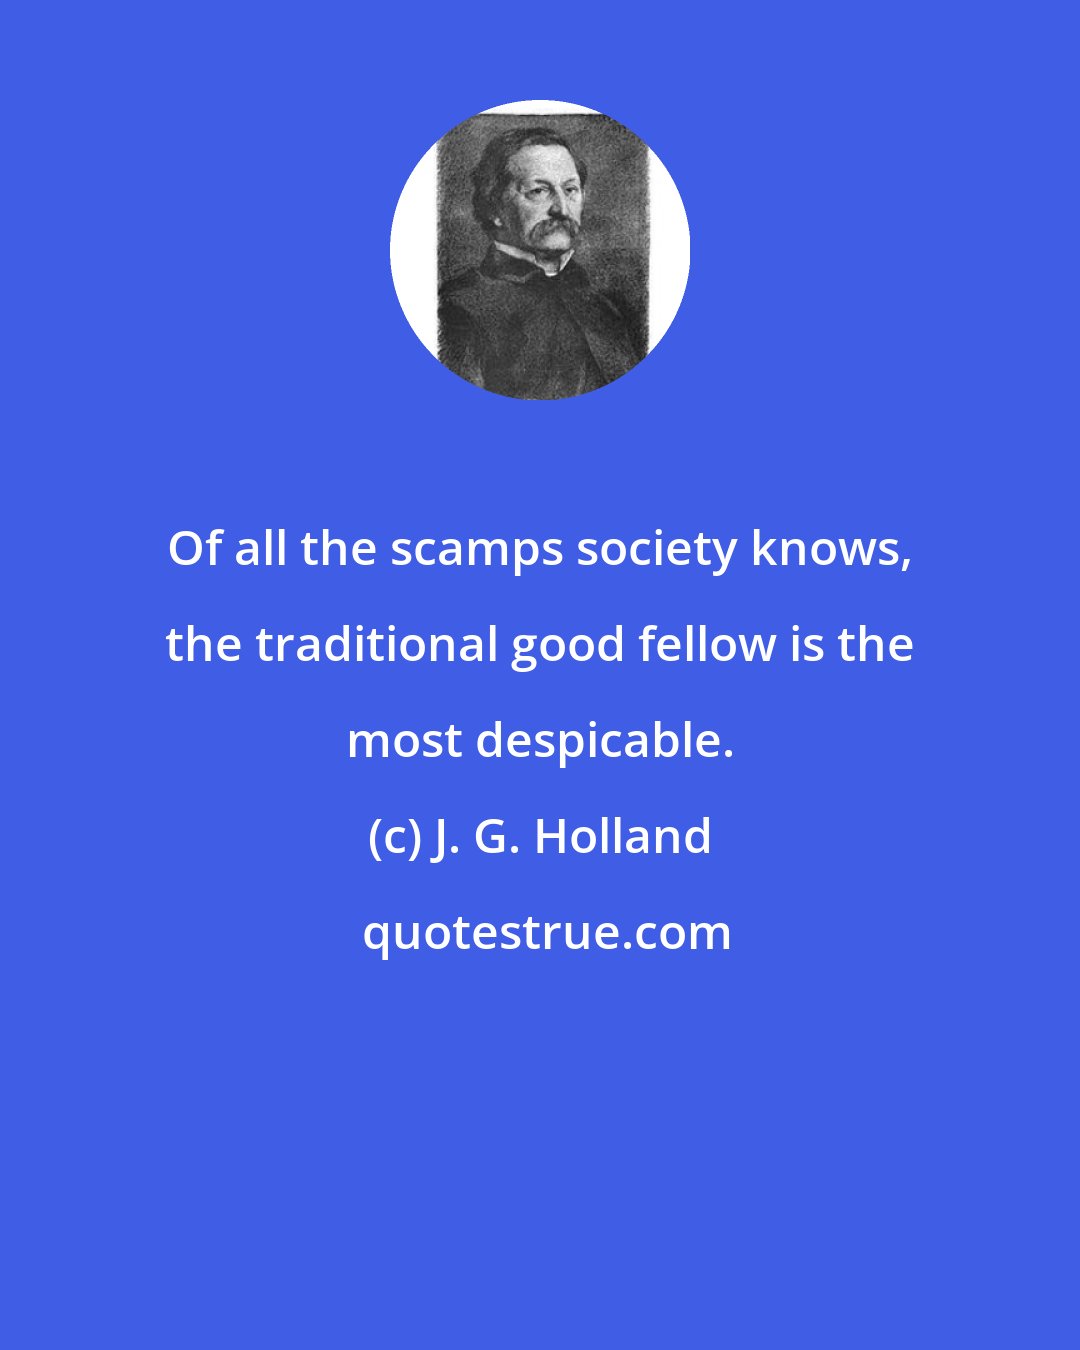 J. G. Holland: Of all the scamps society knows, the traditional good fellow is the most despicable.